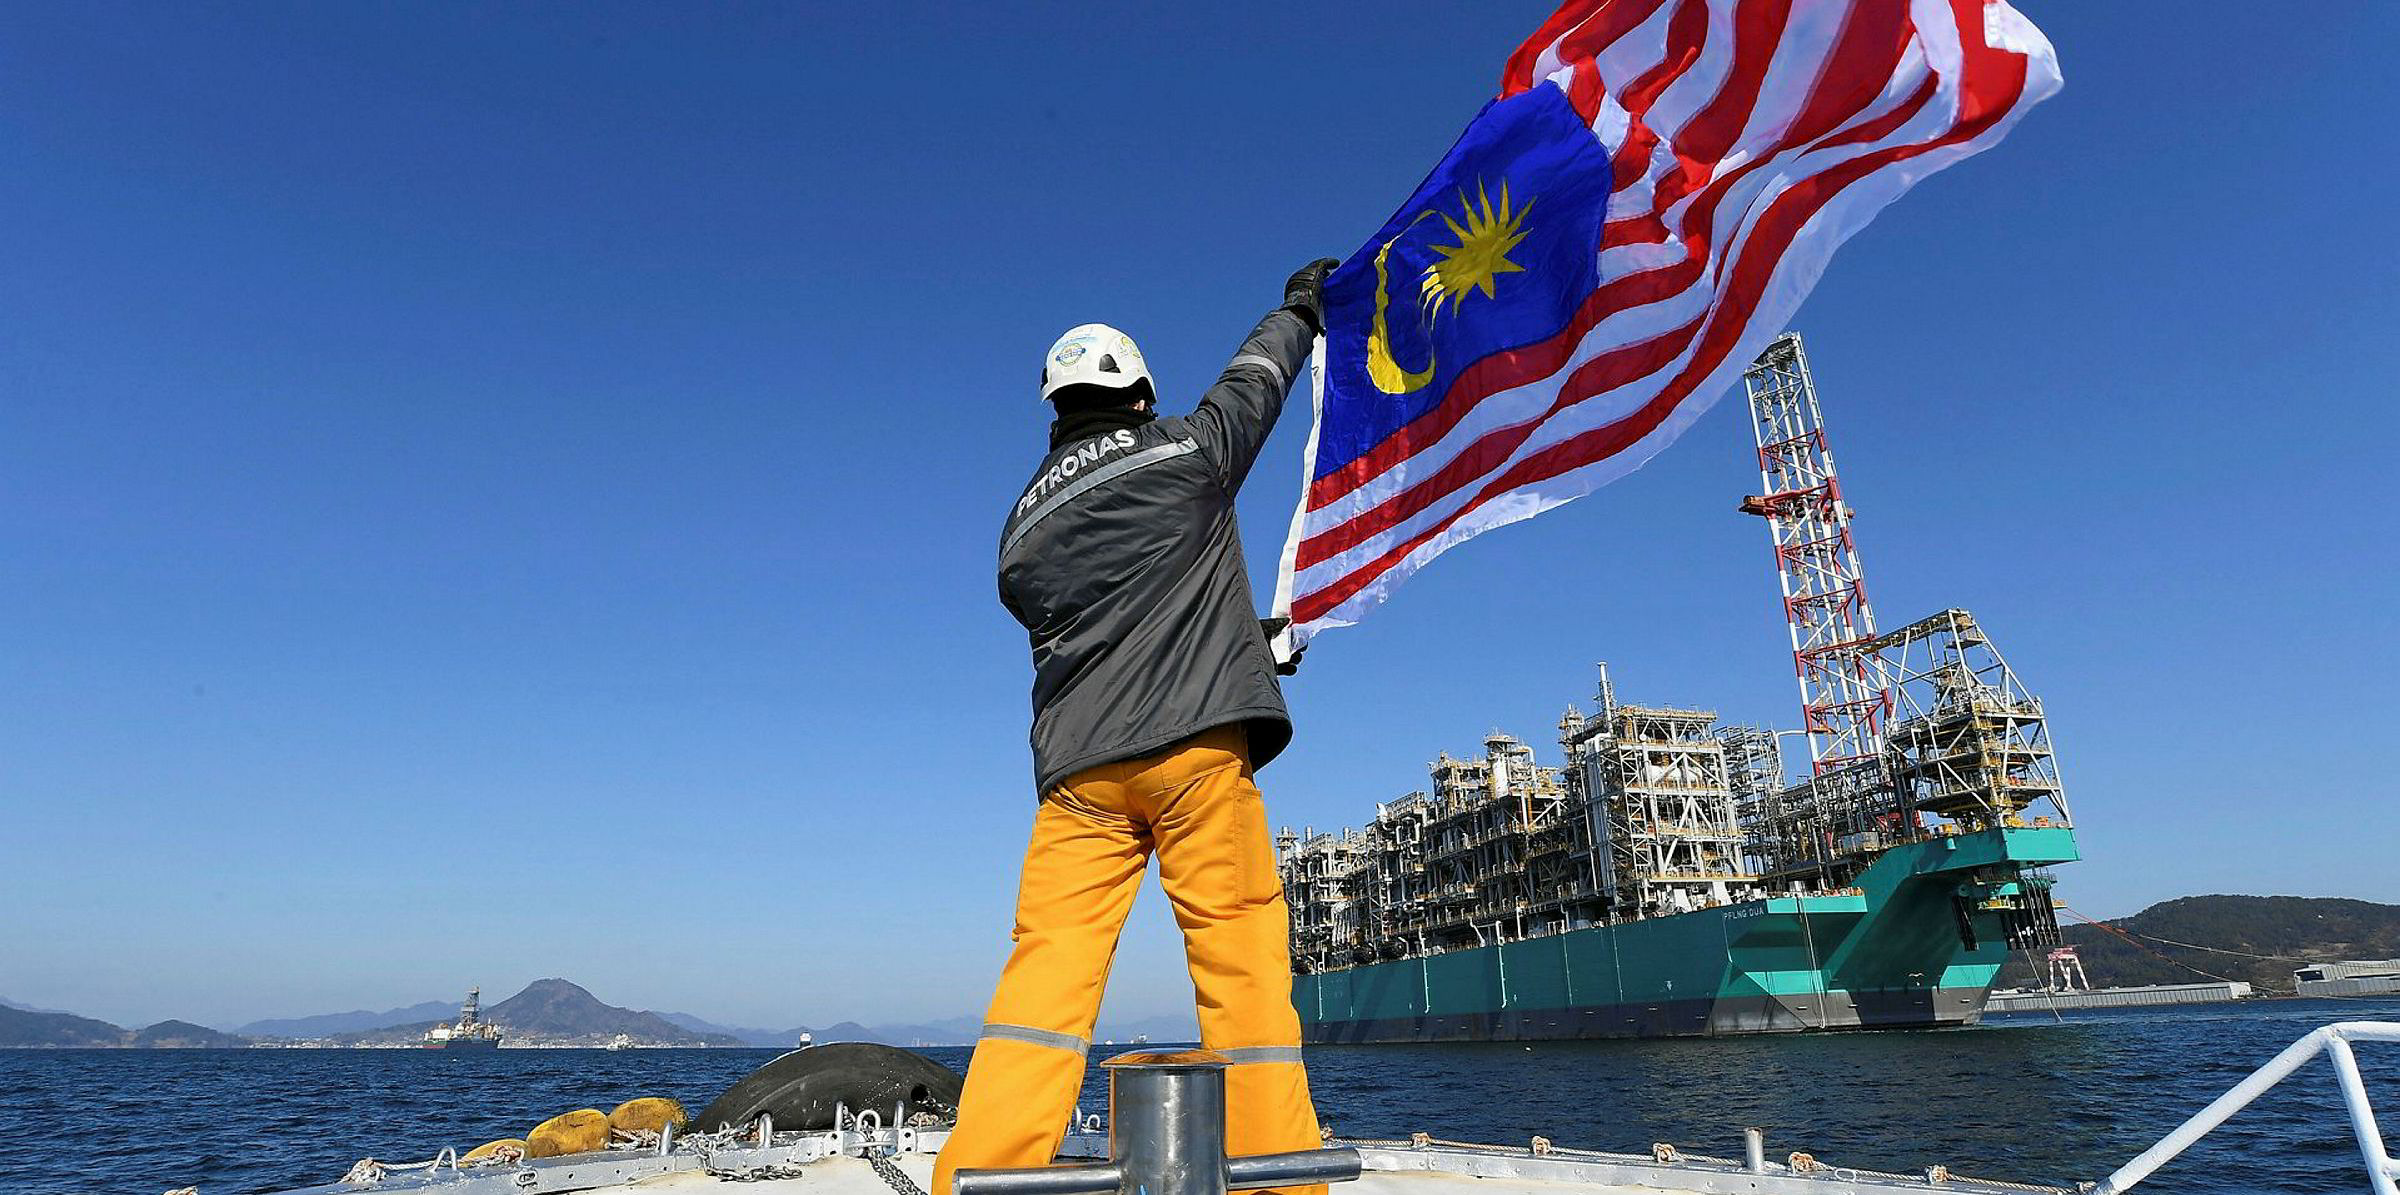 Petronas sets sights on possible new FLNG vessel | Upstream Online